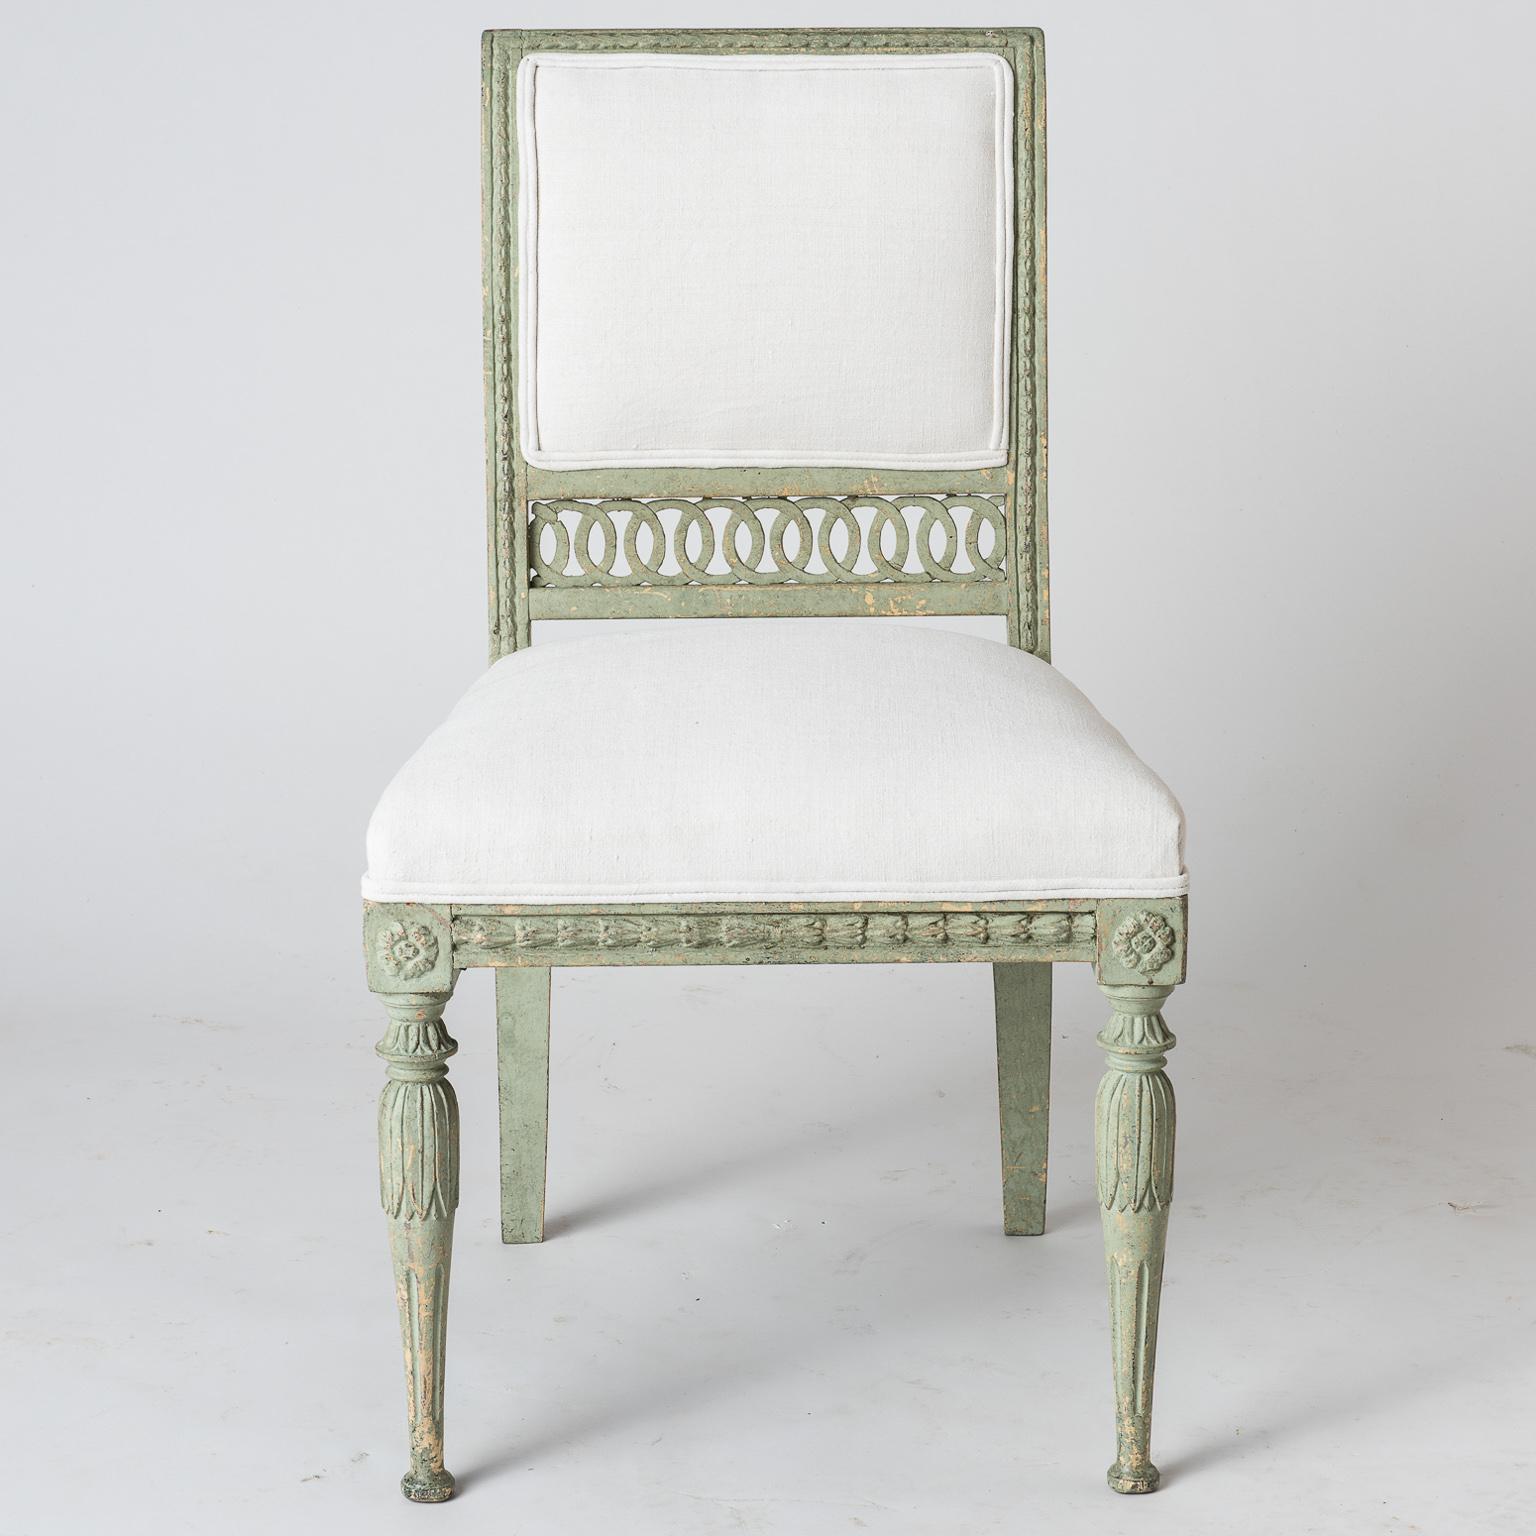 Pair of Swedish Gustavian Period Side Chairs in Old Green Paint, circa 1800 For Sale 2